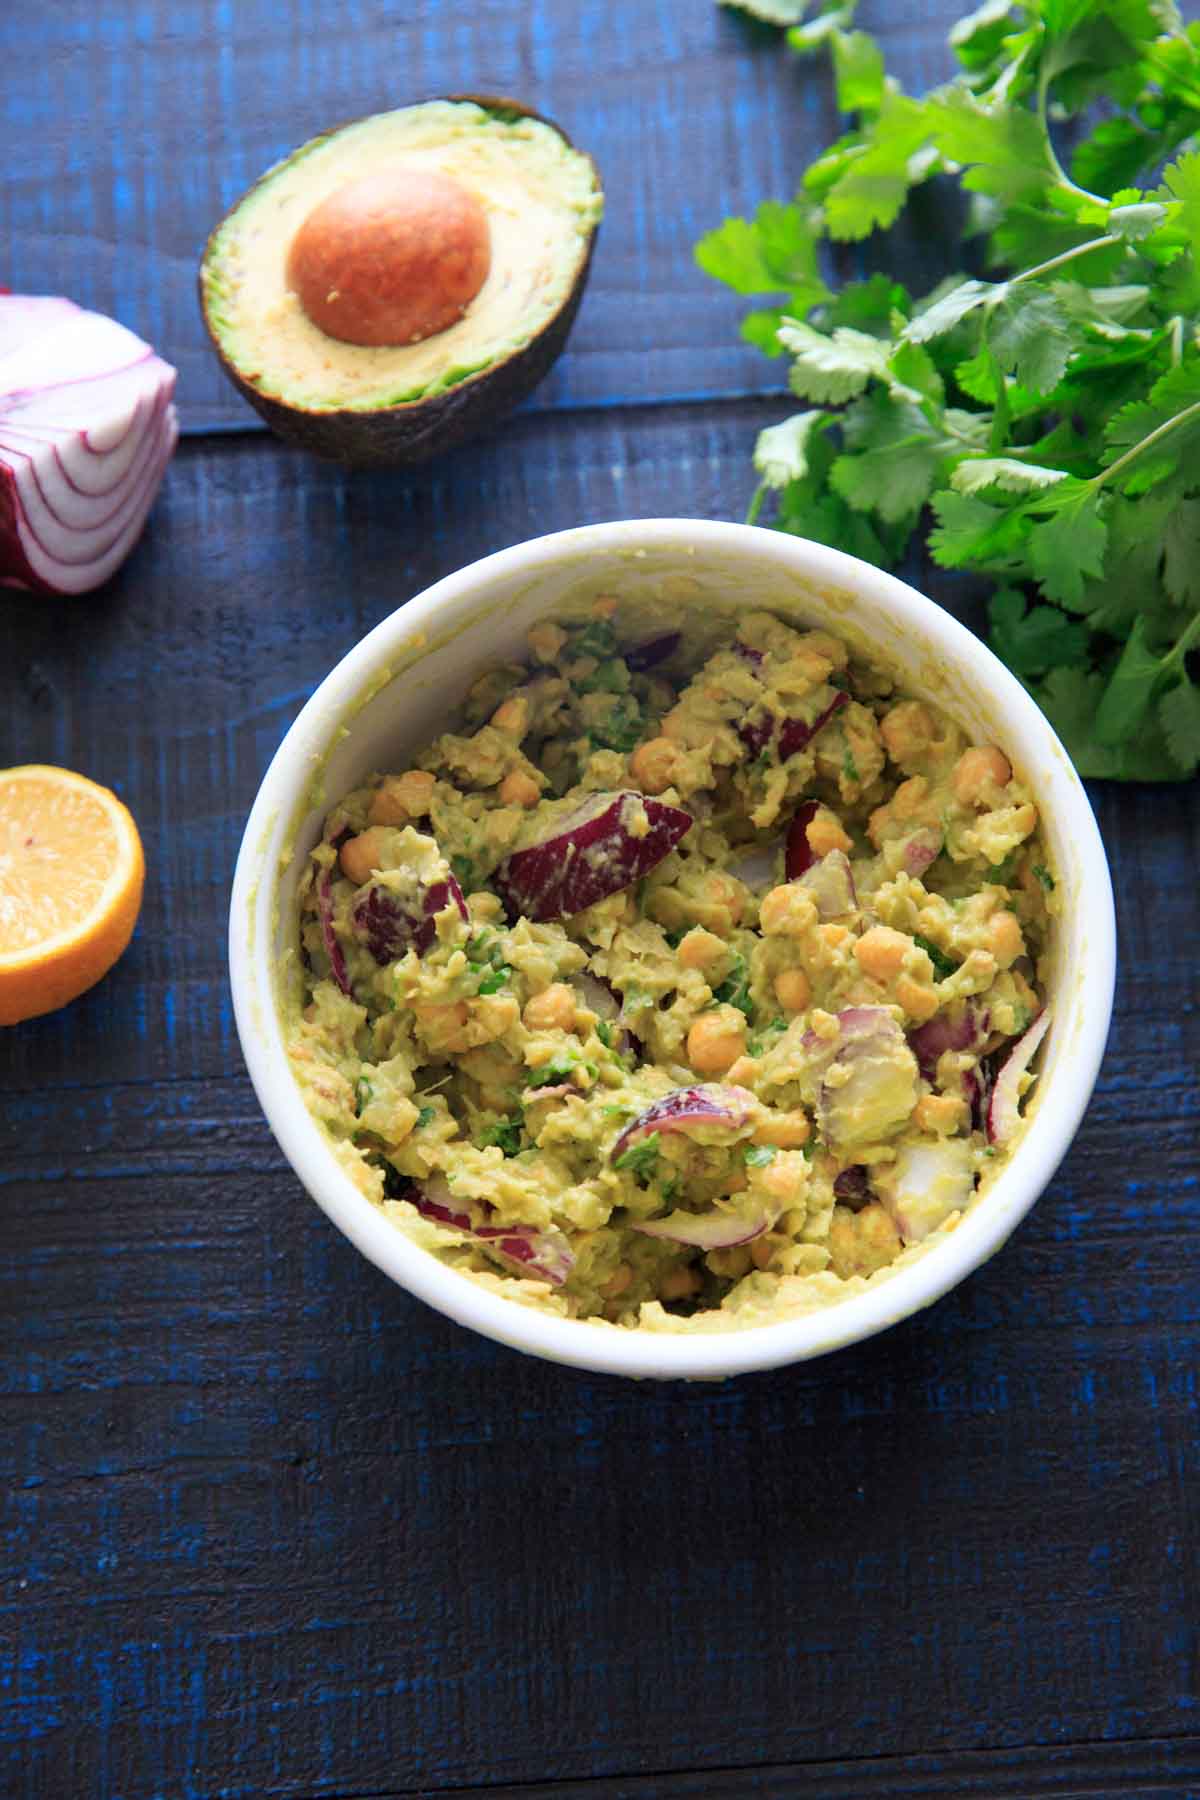 Smashed Avocado and Chickpea Salad in a bowl: picture with ingredients laid out